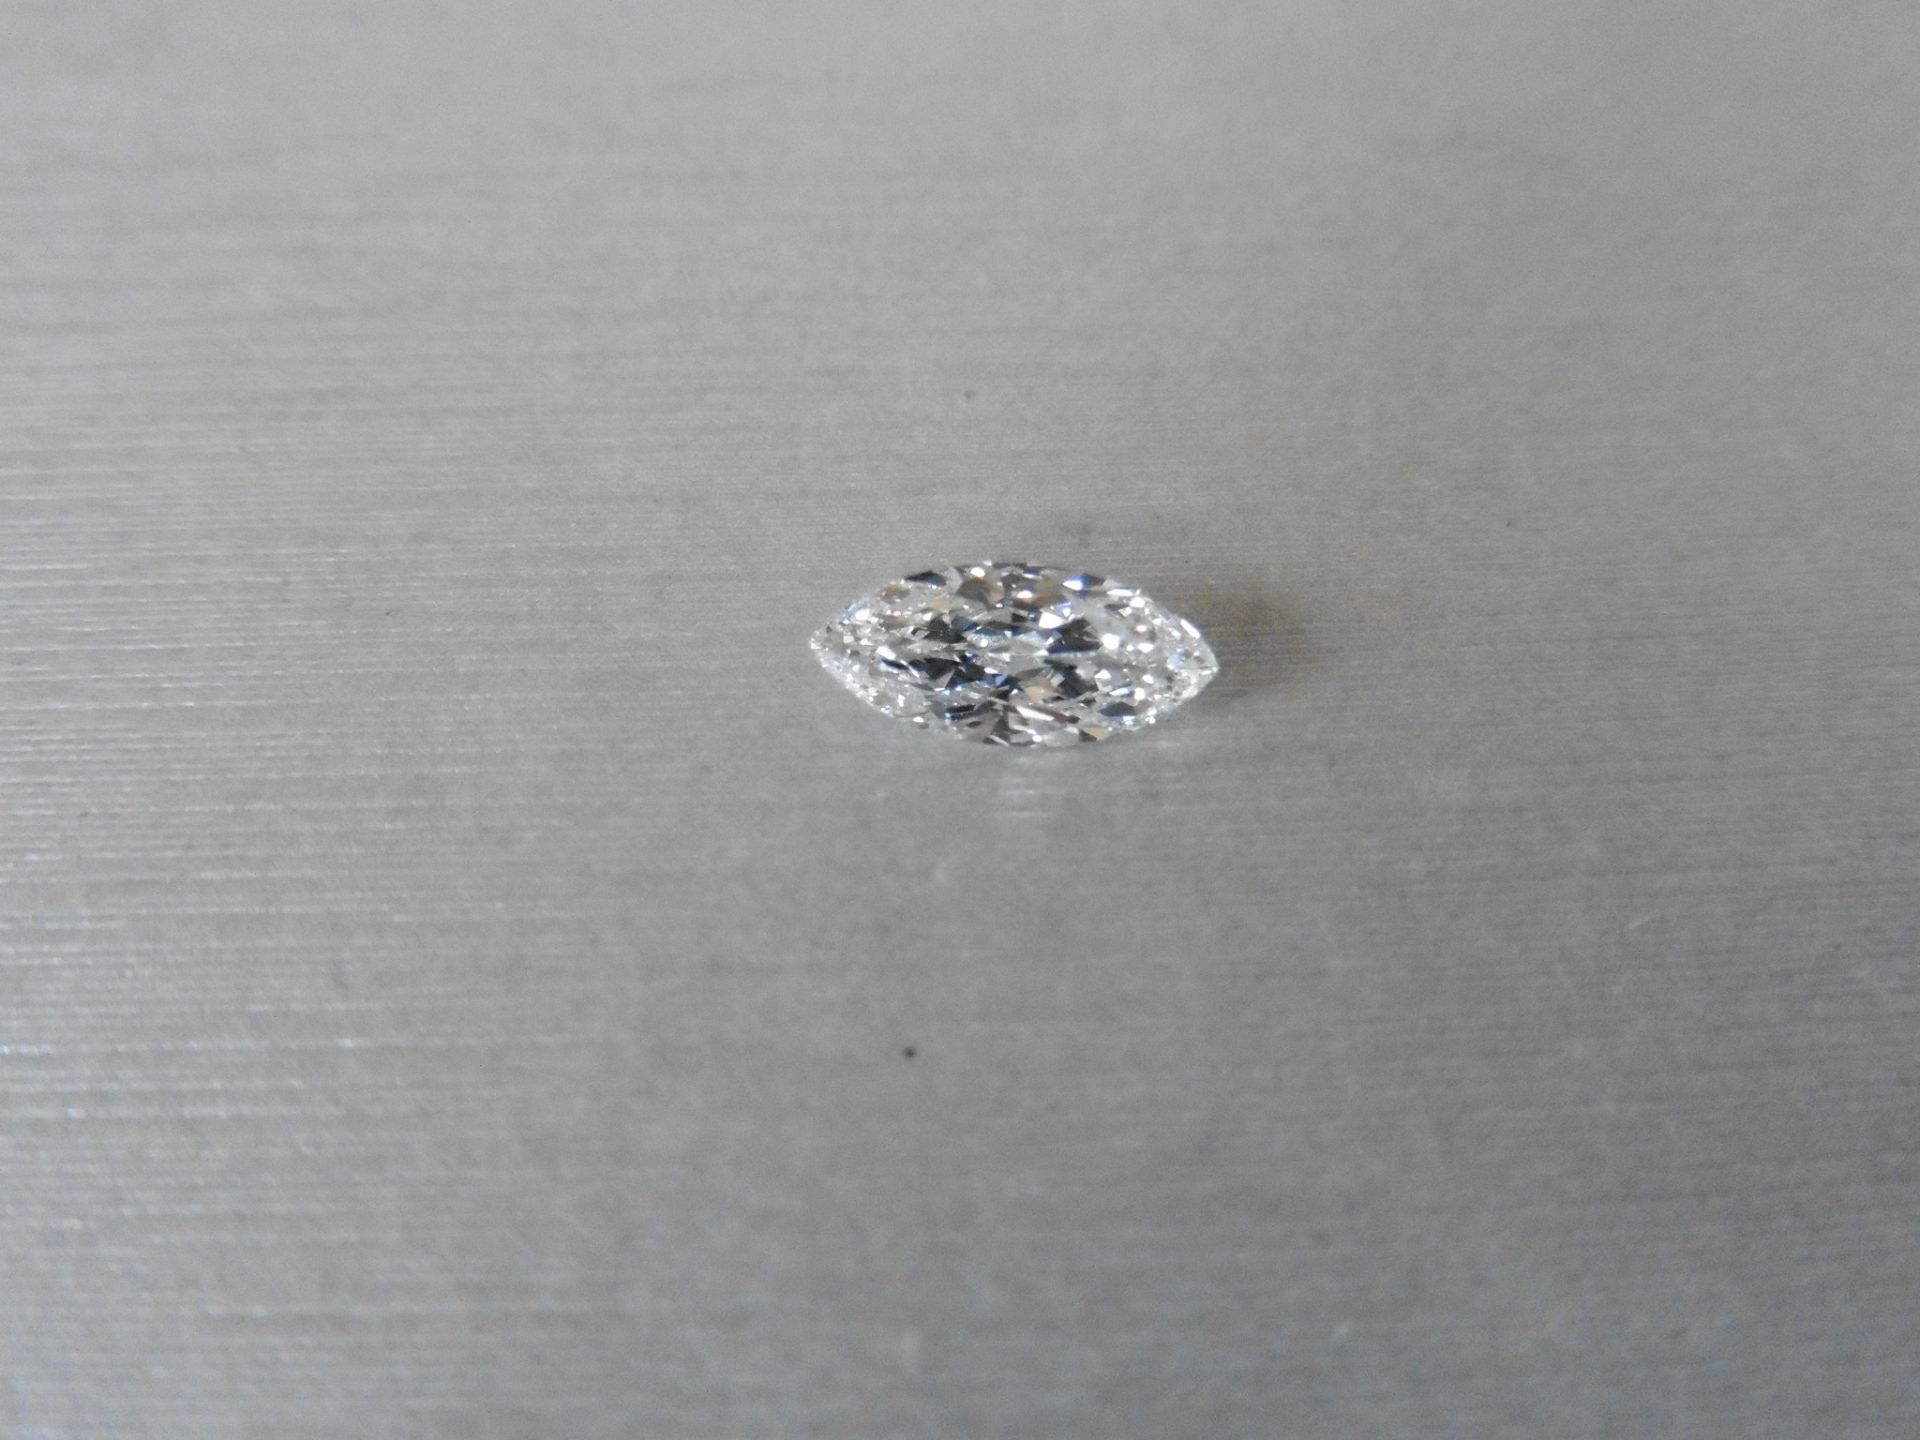 1.02ct loose marquise diamond. D colour and Si2 clarity. Measures 11.04 x 4.92 x 2.94mm . HRD